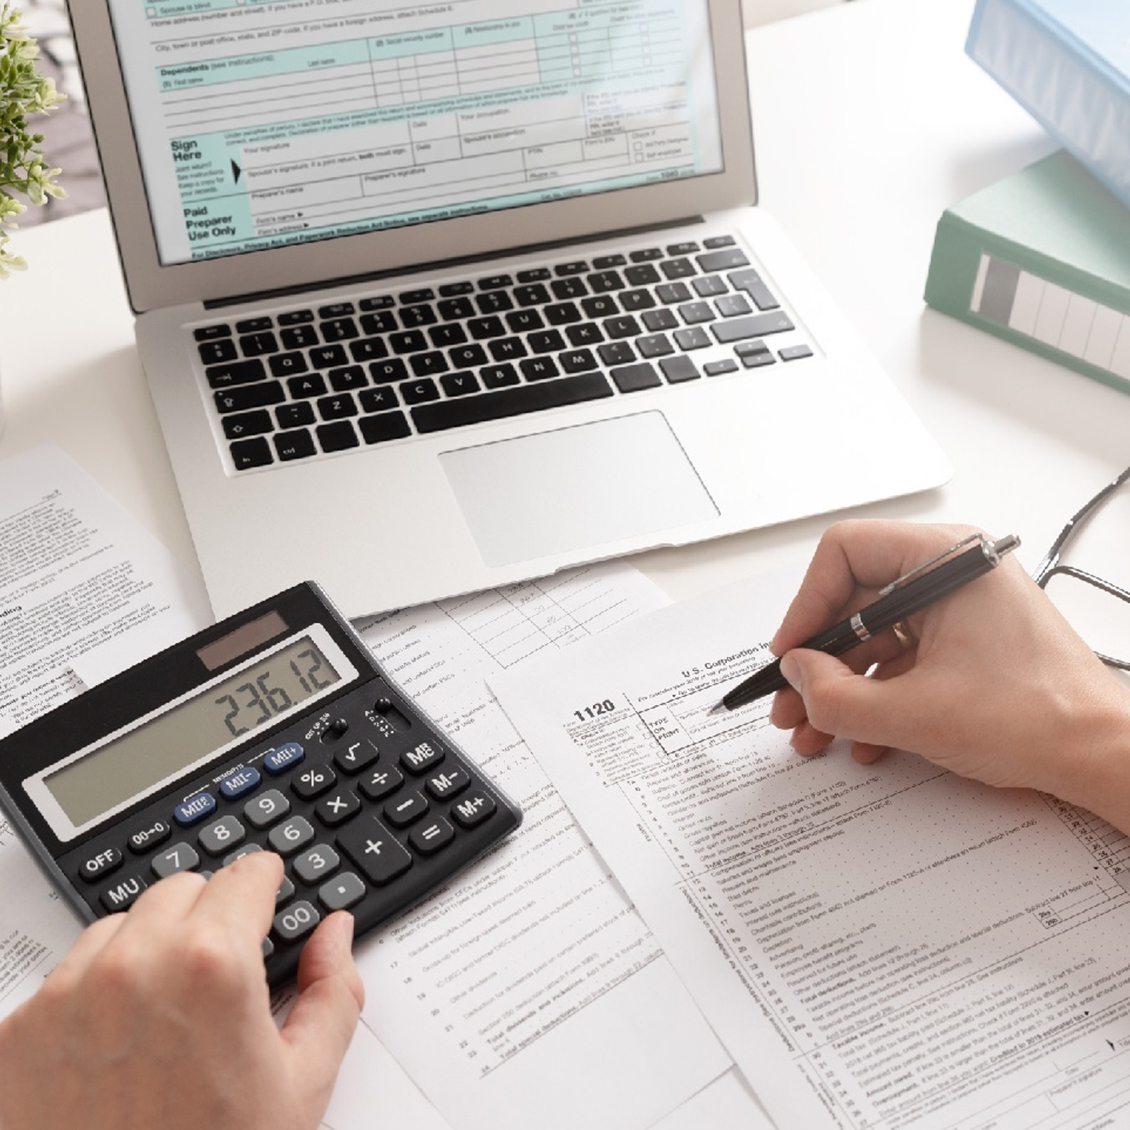 Calculating taxes and payments manually